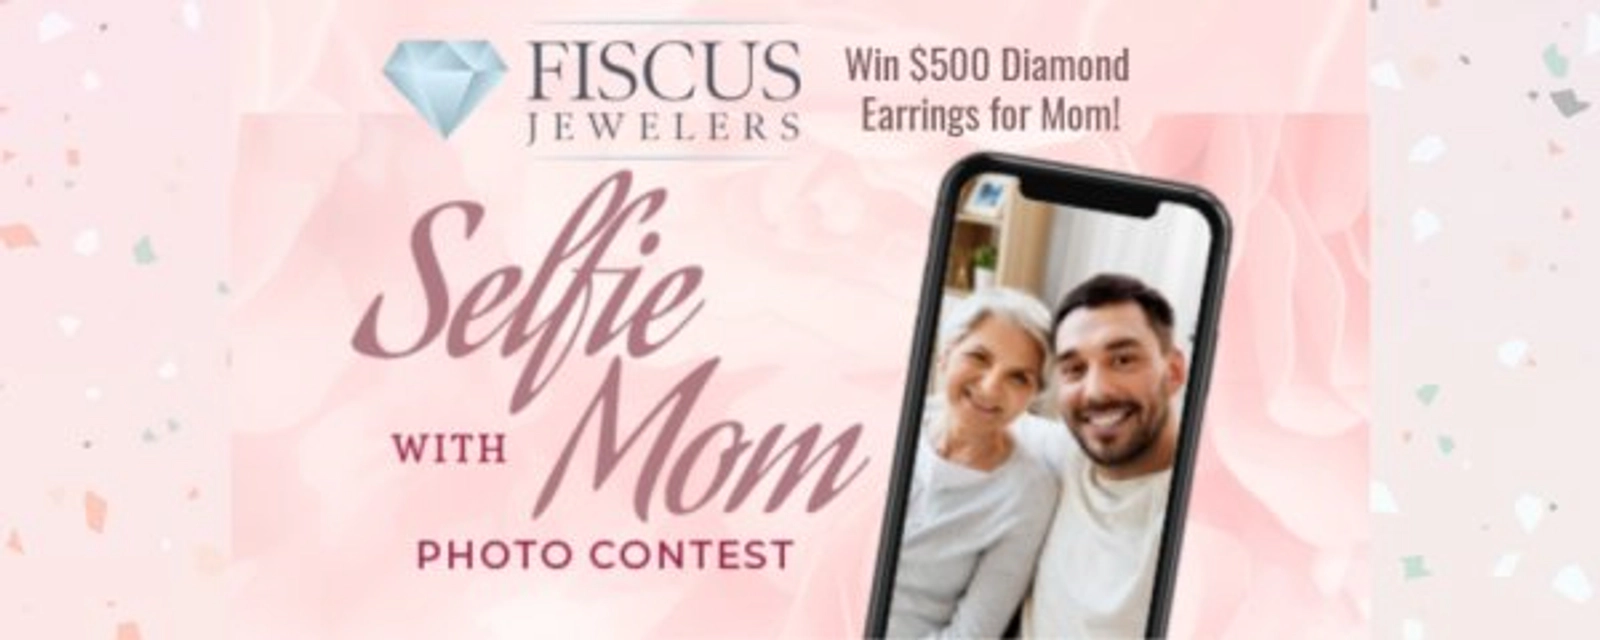 Selfie With Mom Photo Contest - Presented By Fiscus Jewelers - Thumbnail Image